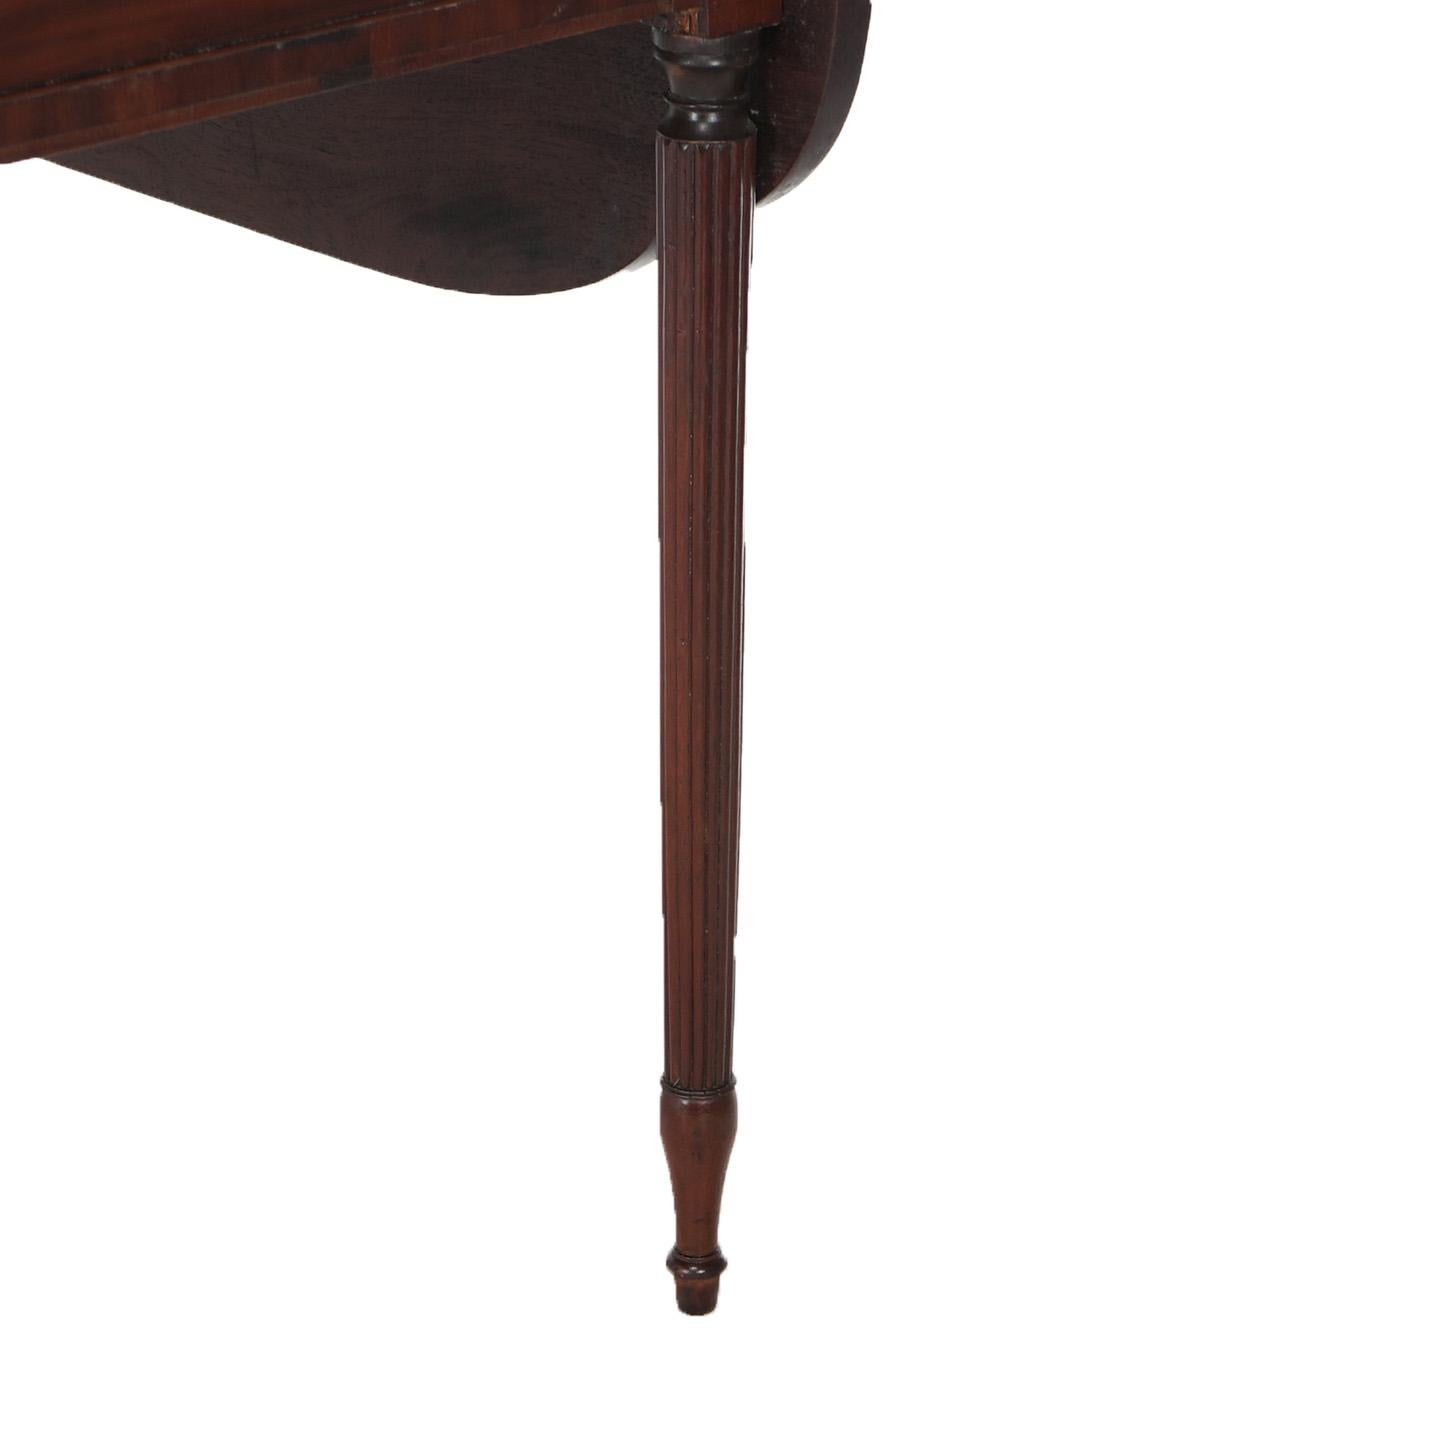 Antique Sheridan Pembroke Drop Leaf Mahogany Table C1820 In Good Condition For Sale In Big Flats, NY